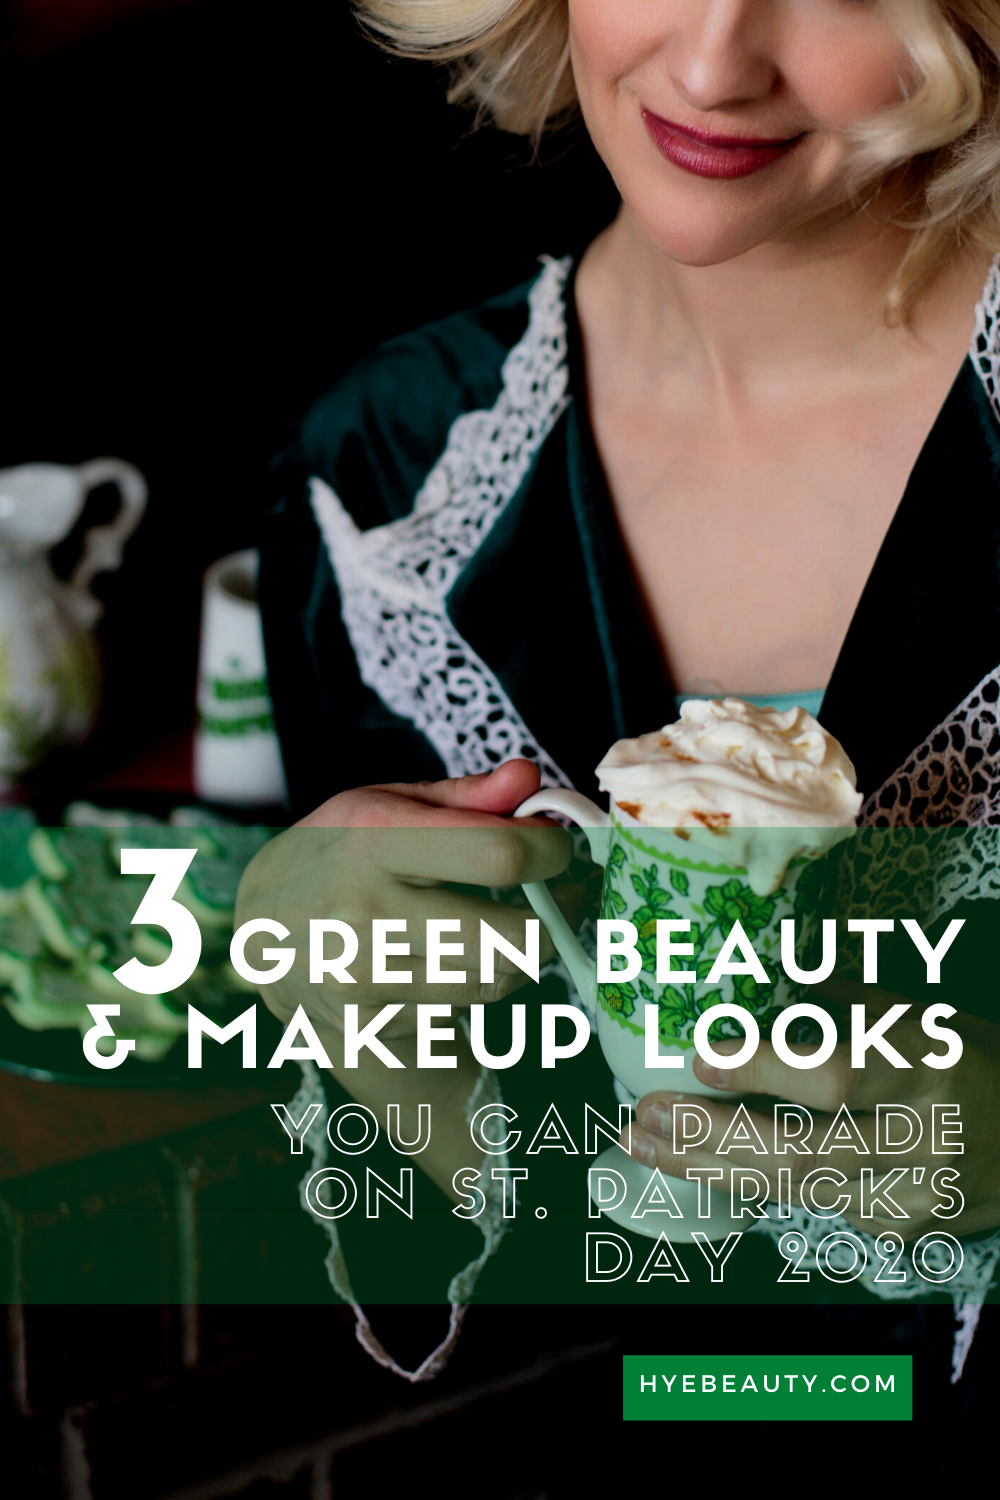 3 Green Beauty & Makeup Looks You Can Parade on St. Patrick's Day 2020